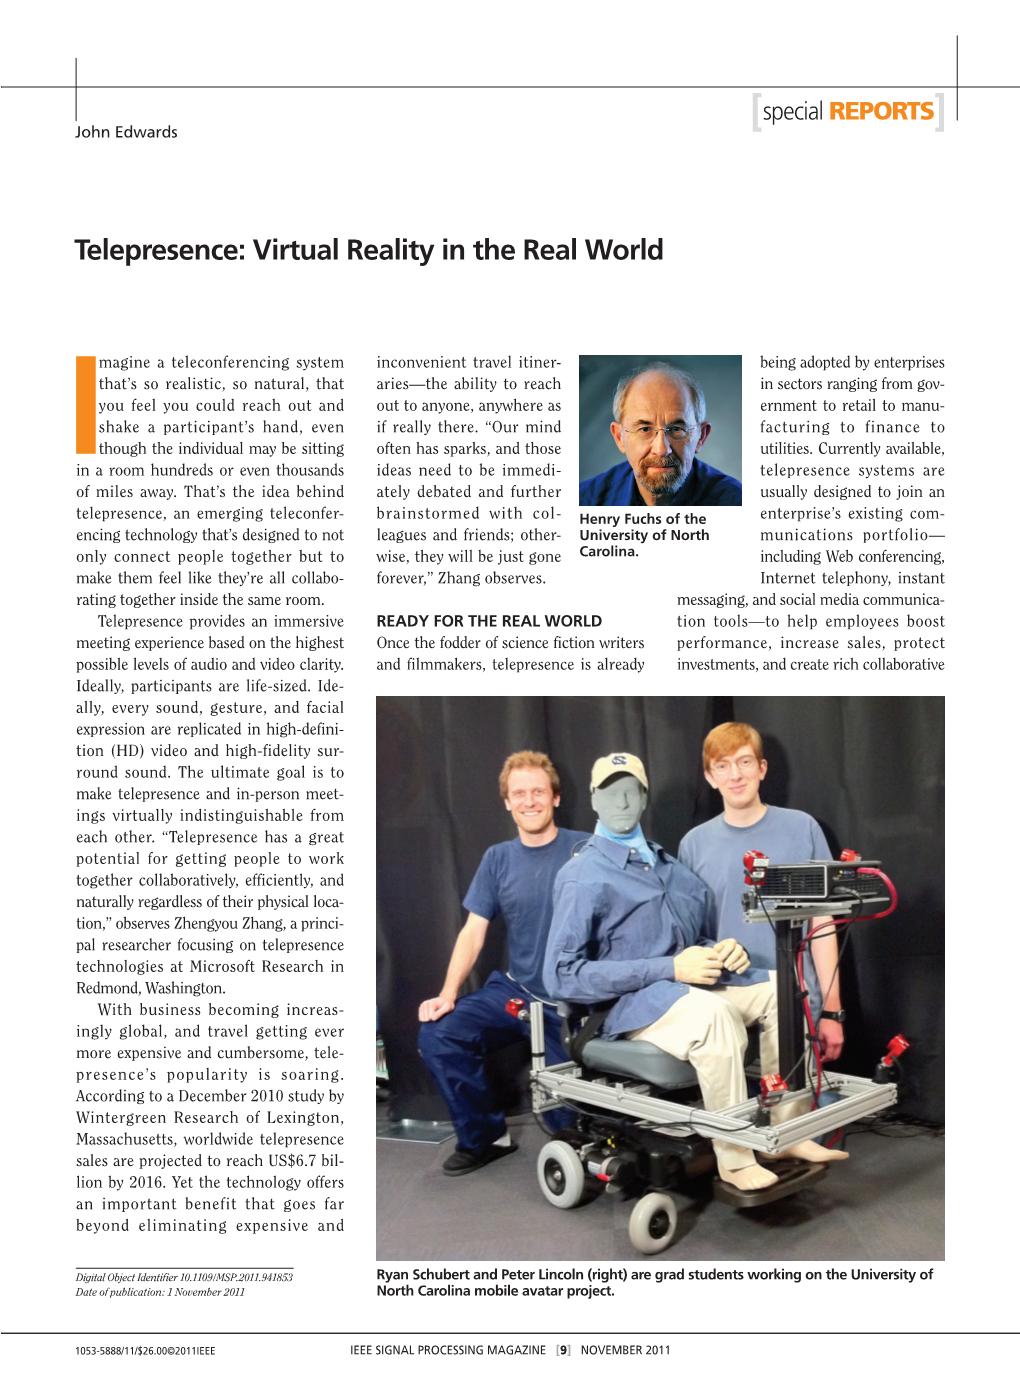 Telepresence: Virtual Reality in the Real World